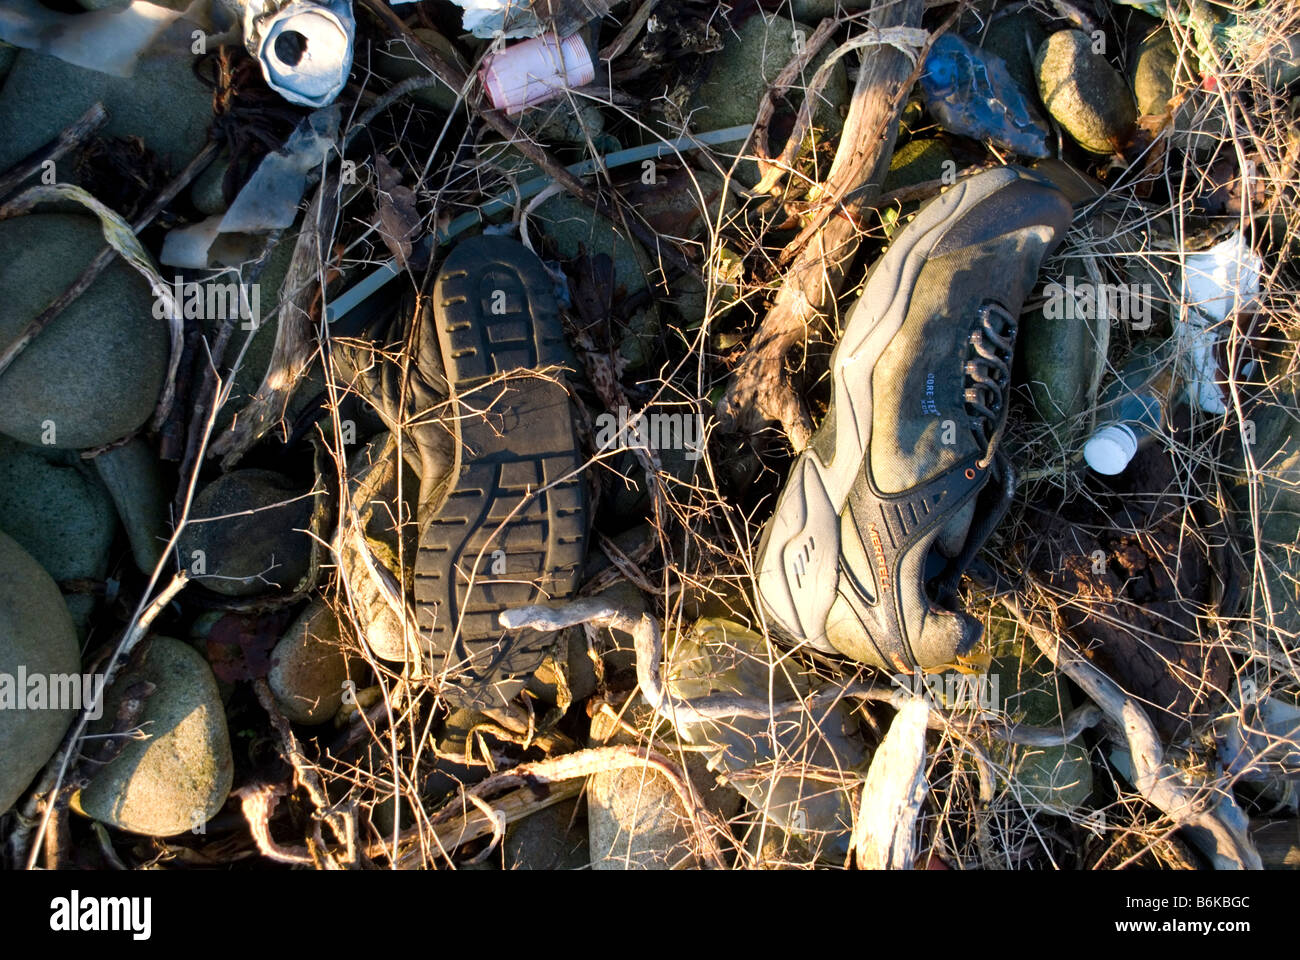 Discarded training shoes on beach in Donegal, Ireland. Stock Photo